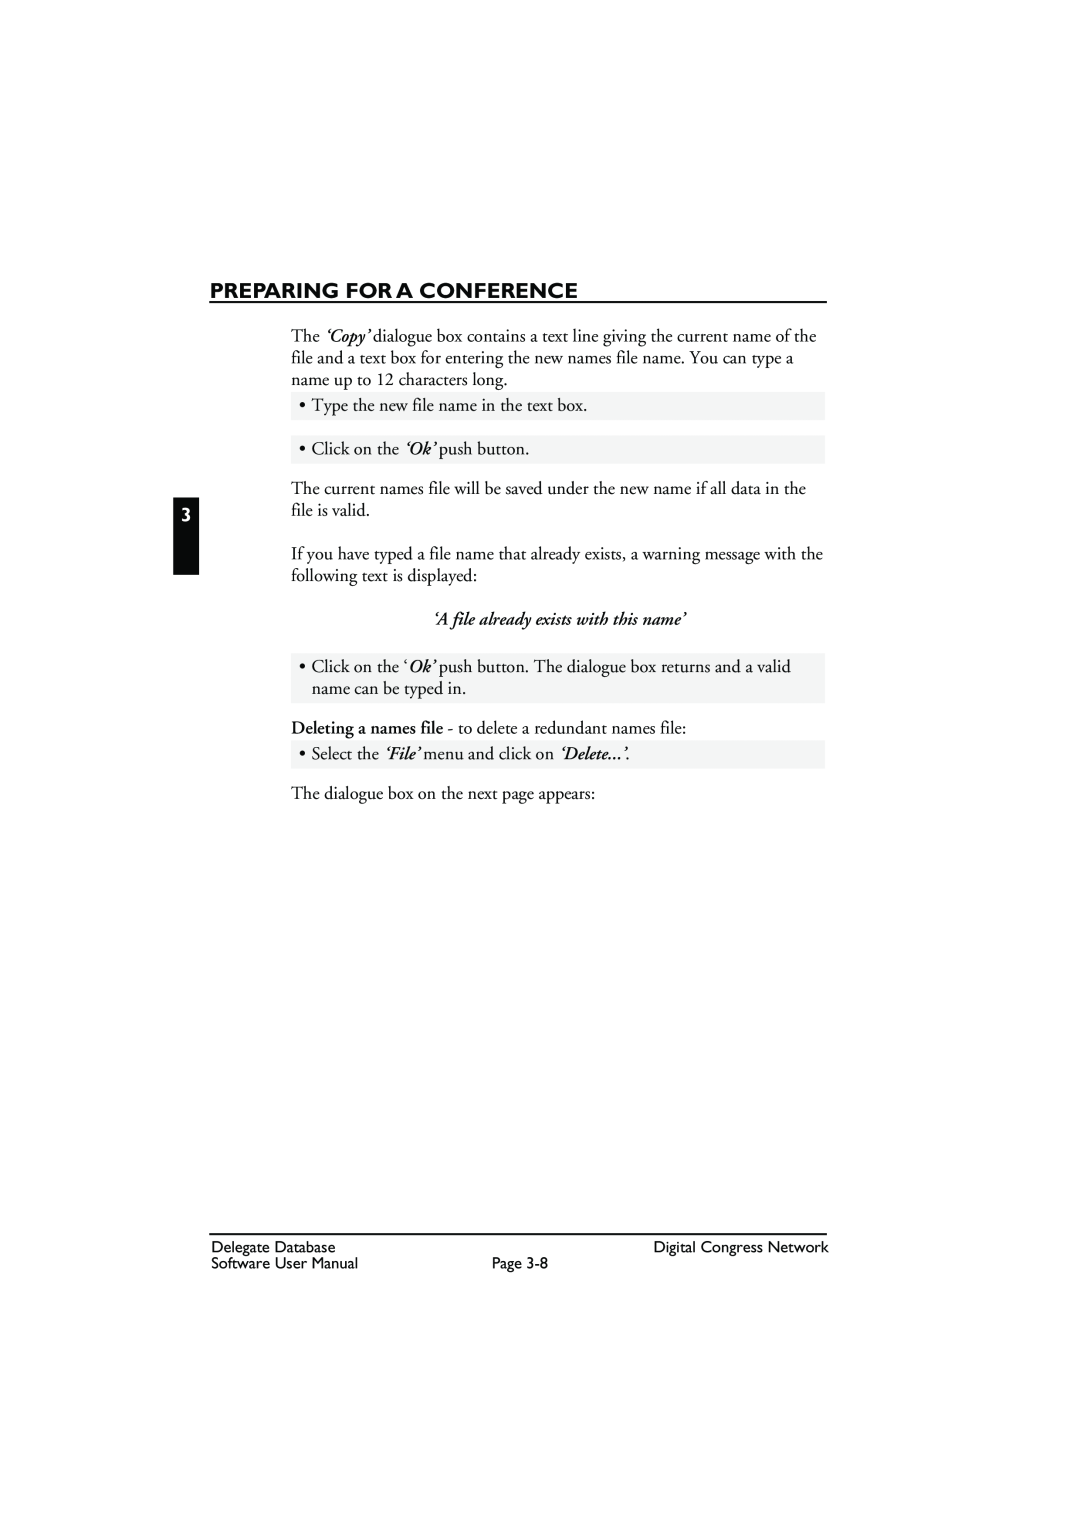 Bosch Appliances LBB3580 user manual Preparing For A Conference, Type the new file name in the text box 